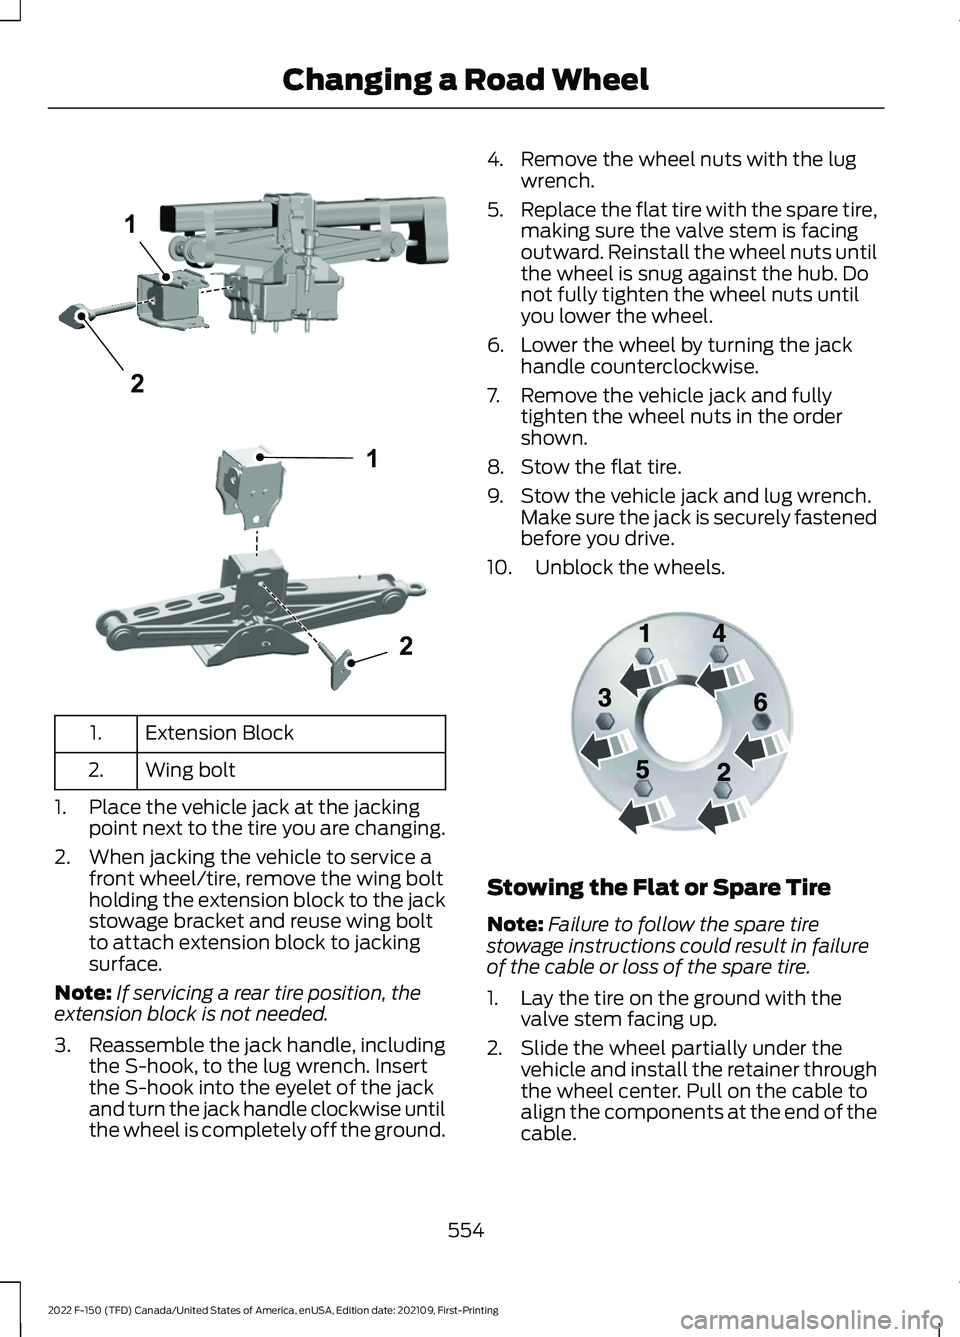 FORD F-150 2022  Owners Manual Extension Block
1.
Wing bolt
2.
1. Place the vehicle jack at the jacking point next to the tire you are changing.
2. When jacking the vehicle to service a front wheel/tire, remove the wing bolt
holdin